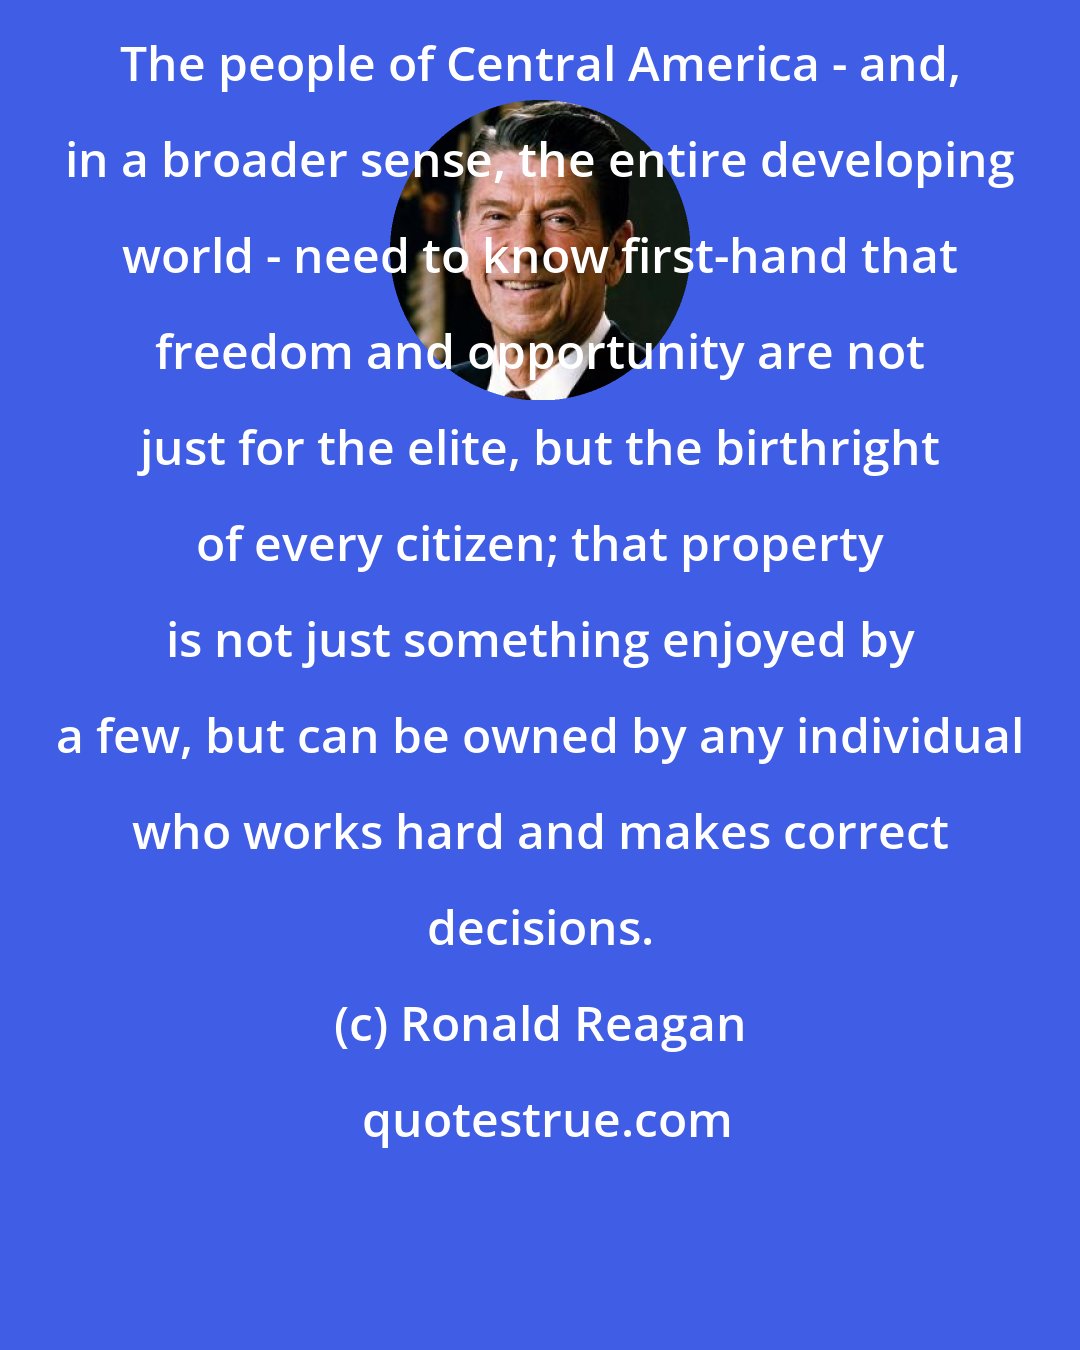 Ronald Reagan: The people of Central America - and, in a broader sense, the entire developing world - need to know first-hand that freedom and opportunity are not just for the elite, but the birthright of every citizen; that property is not just something enjoyed by a few, but can be owned by any individual who works hard and makes correct decisions.